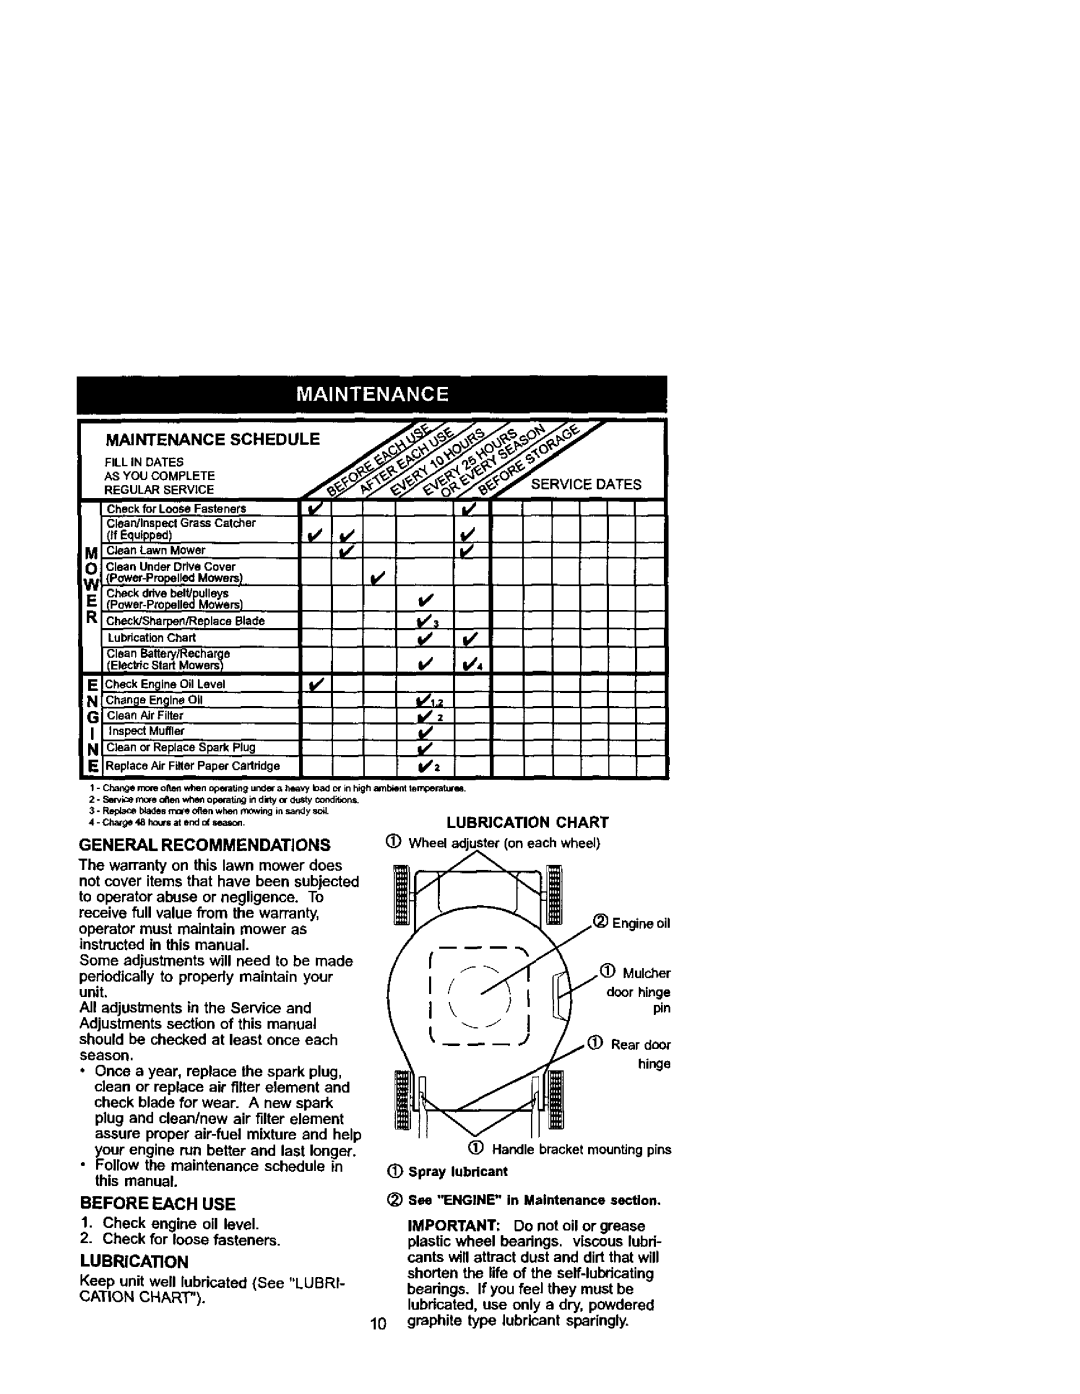 Craftsman 38872 owner manual MA, rE.,NCESCNEDUE 